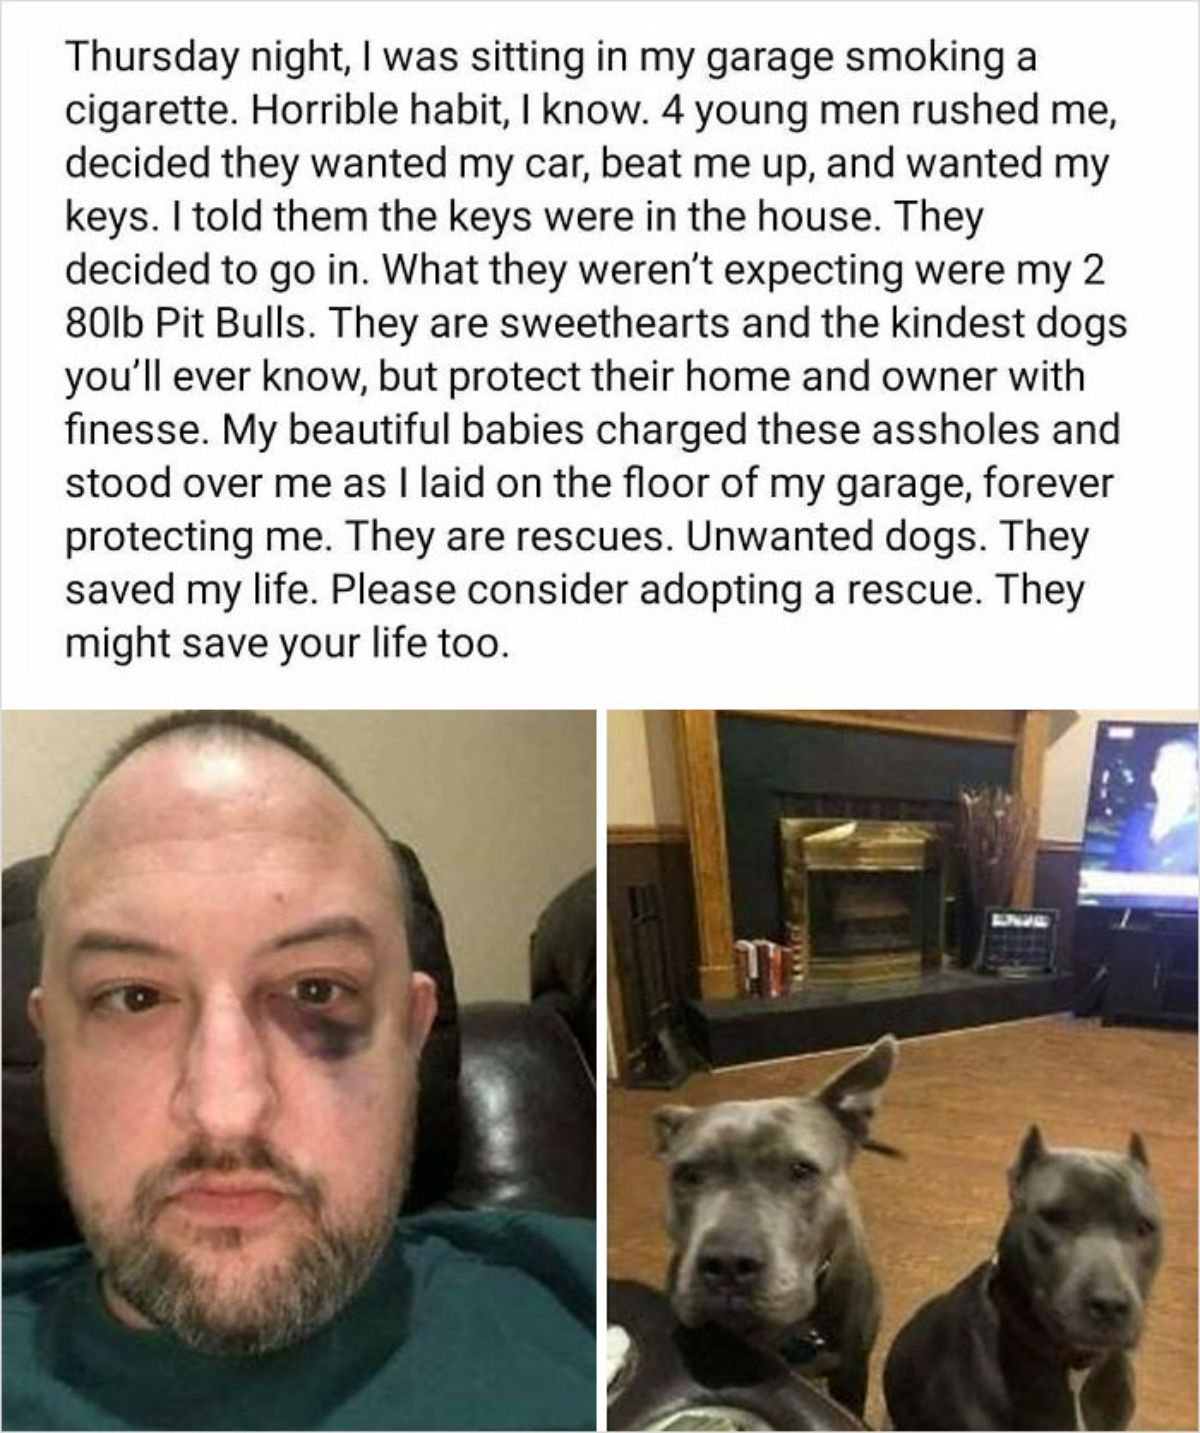 1 photo of man with black eye and 1 photo of 2 grey pitbulls with the caption saying they protected the man from thieves who beat him up